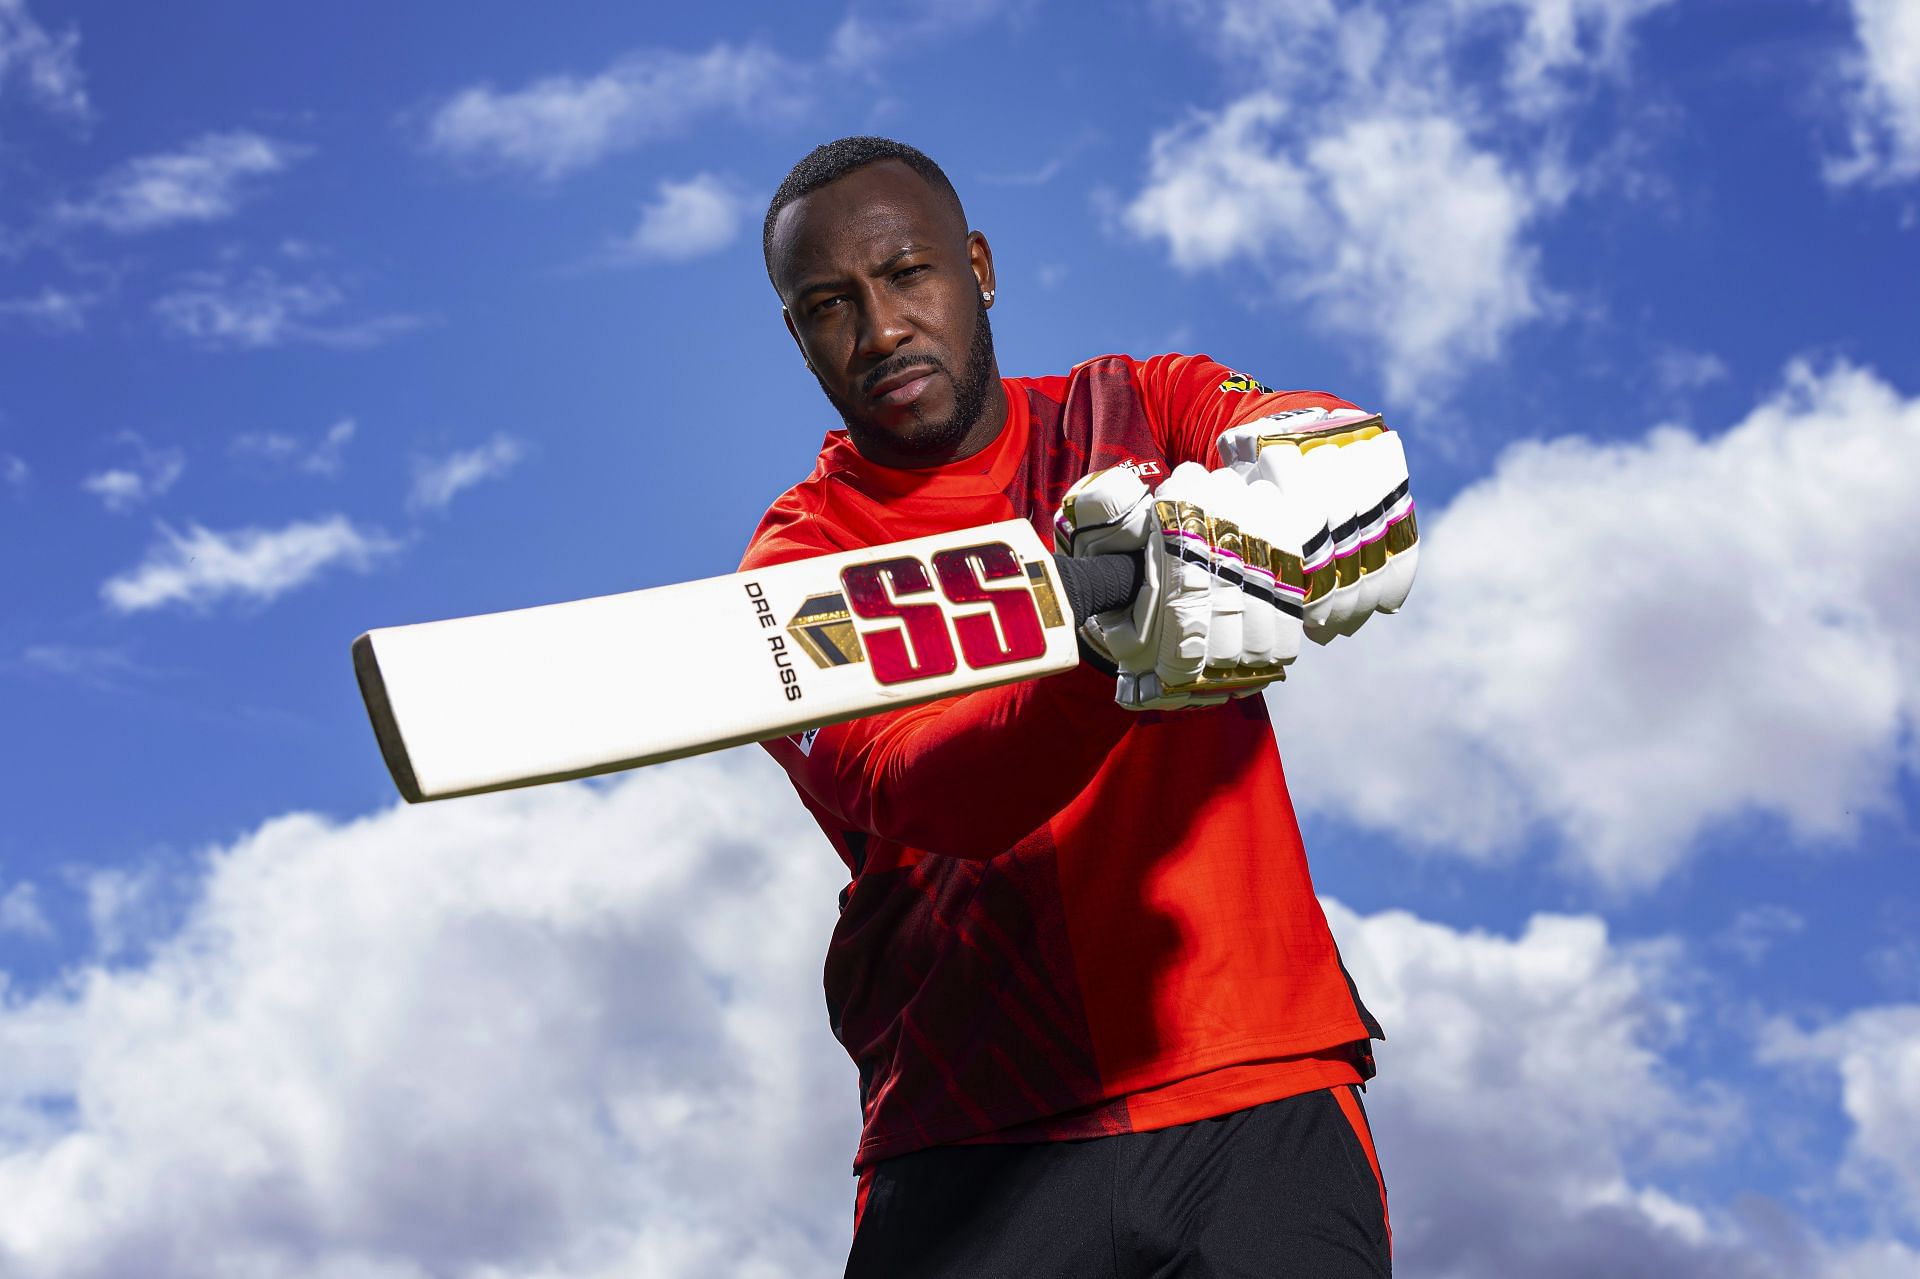 Andre Russell plays for the Melbourne Renegades in the BBL